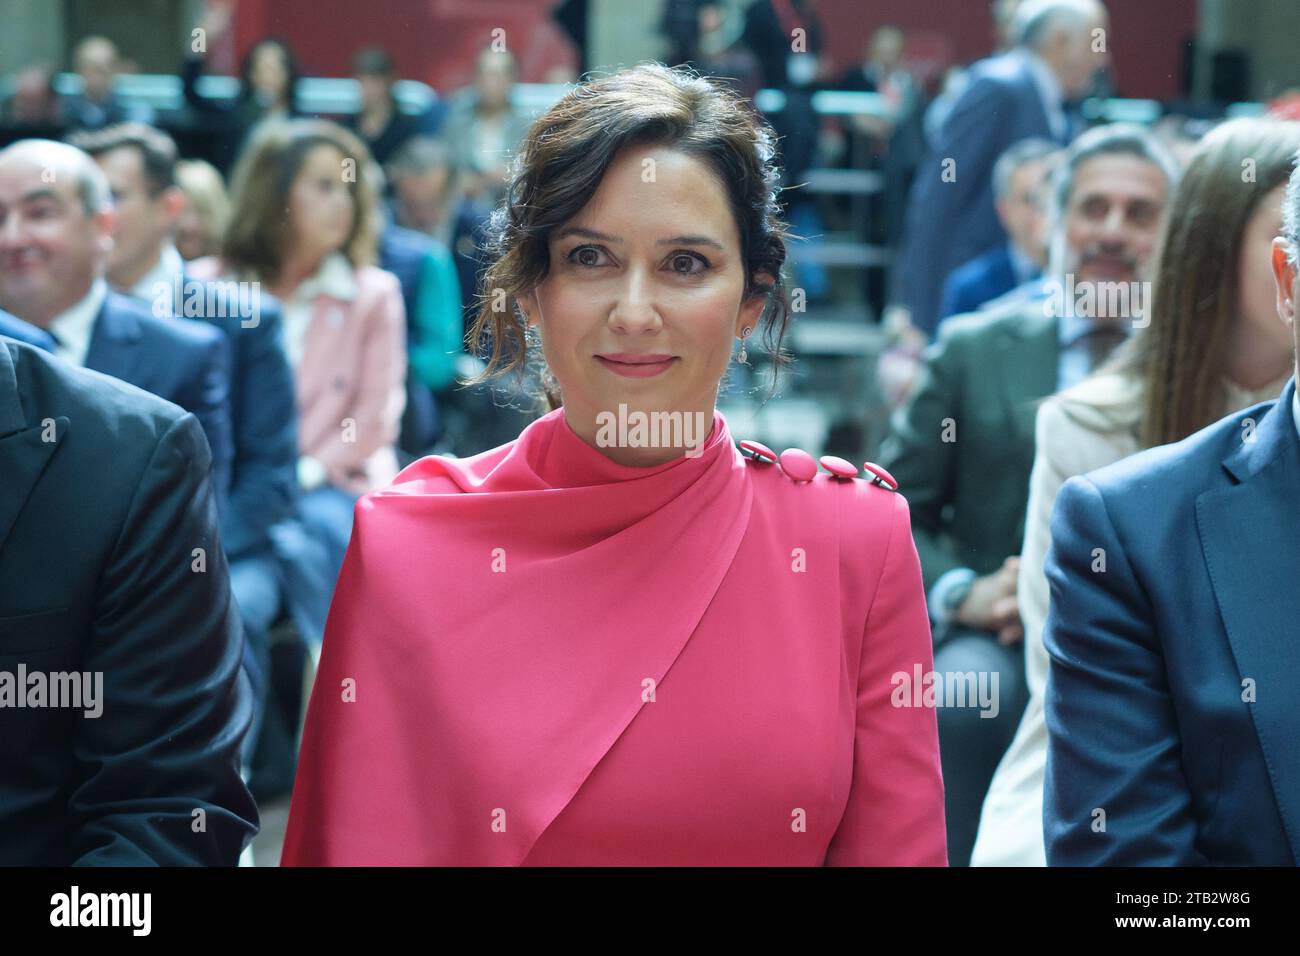 The president of the Community Isabel Díaz Ayuso, participates in the events of the 45th anniversary of the Spanish Constitution, at the Real Casa de Stock Photo